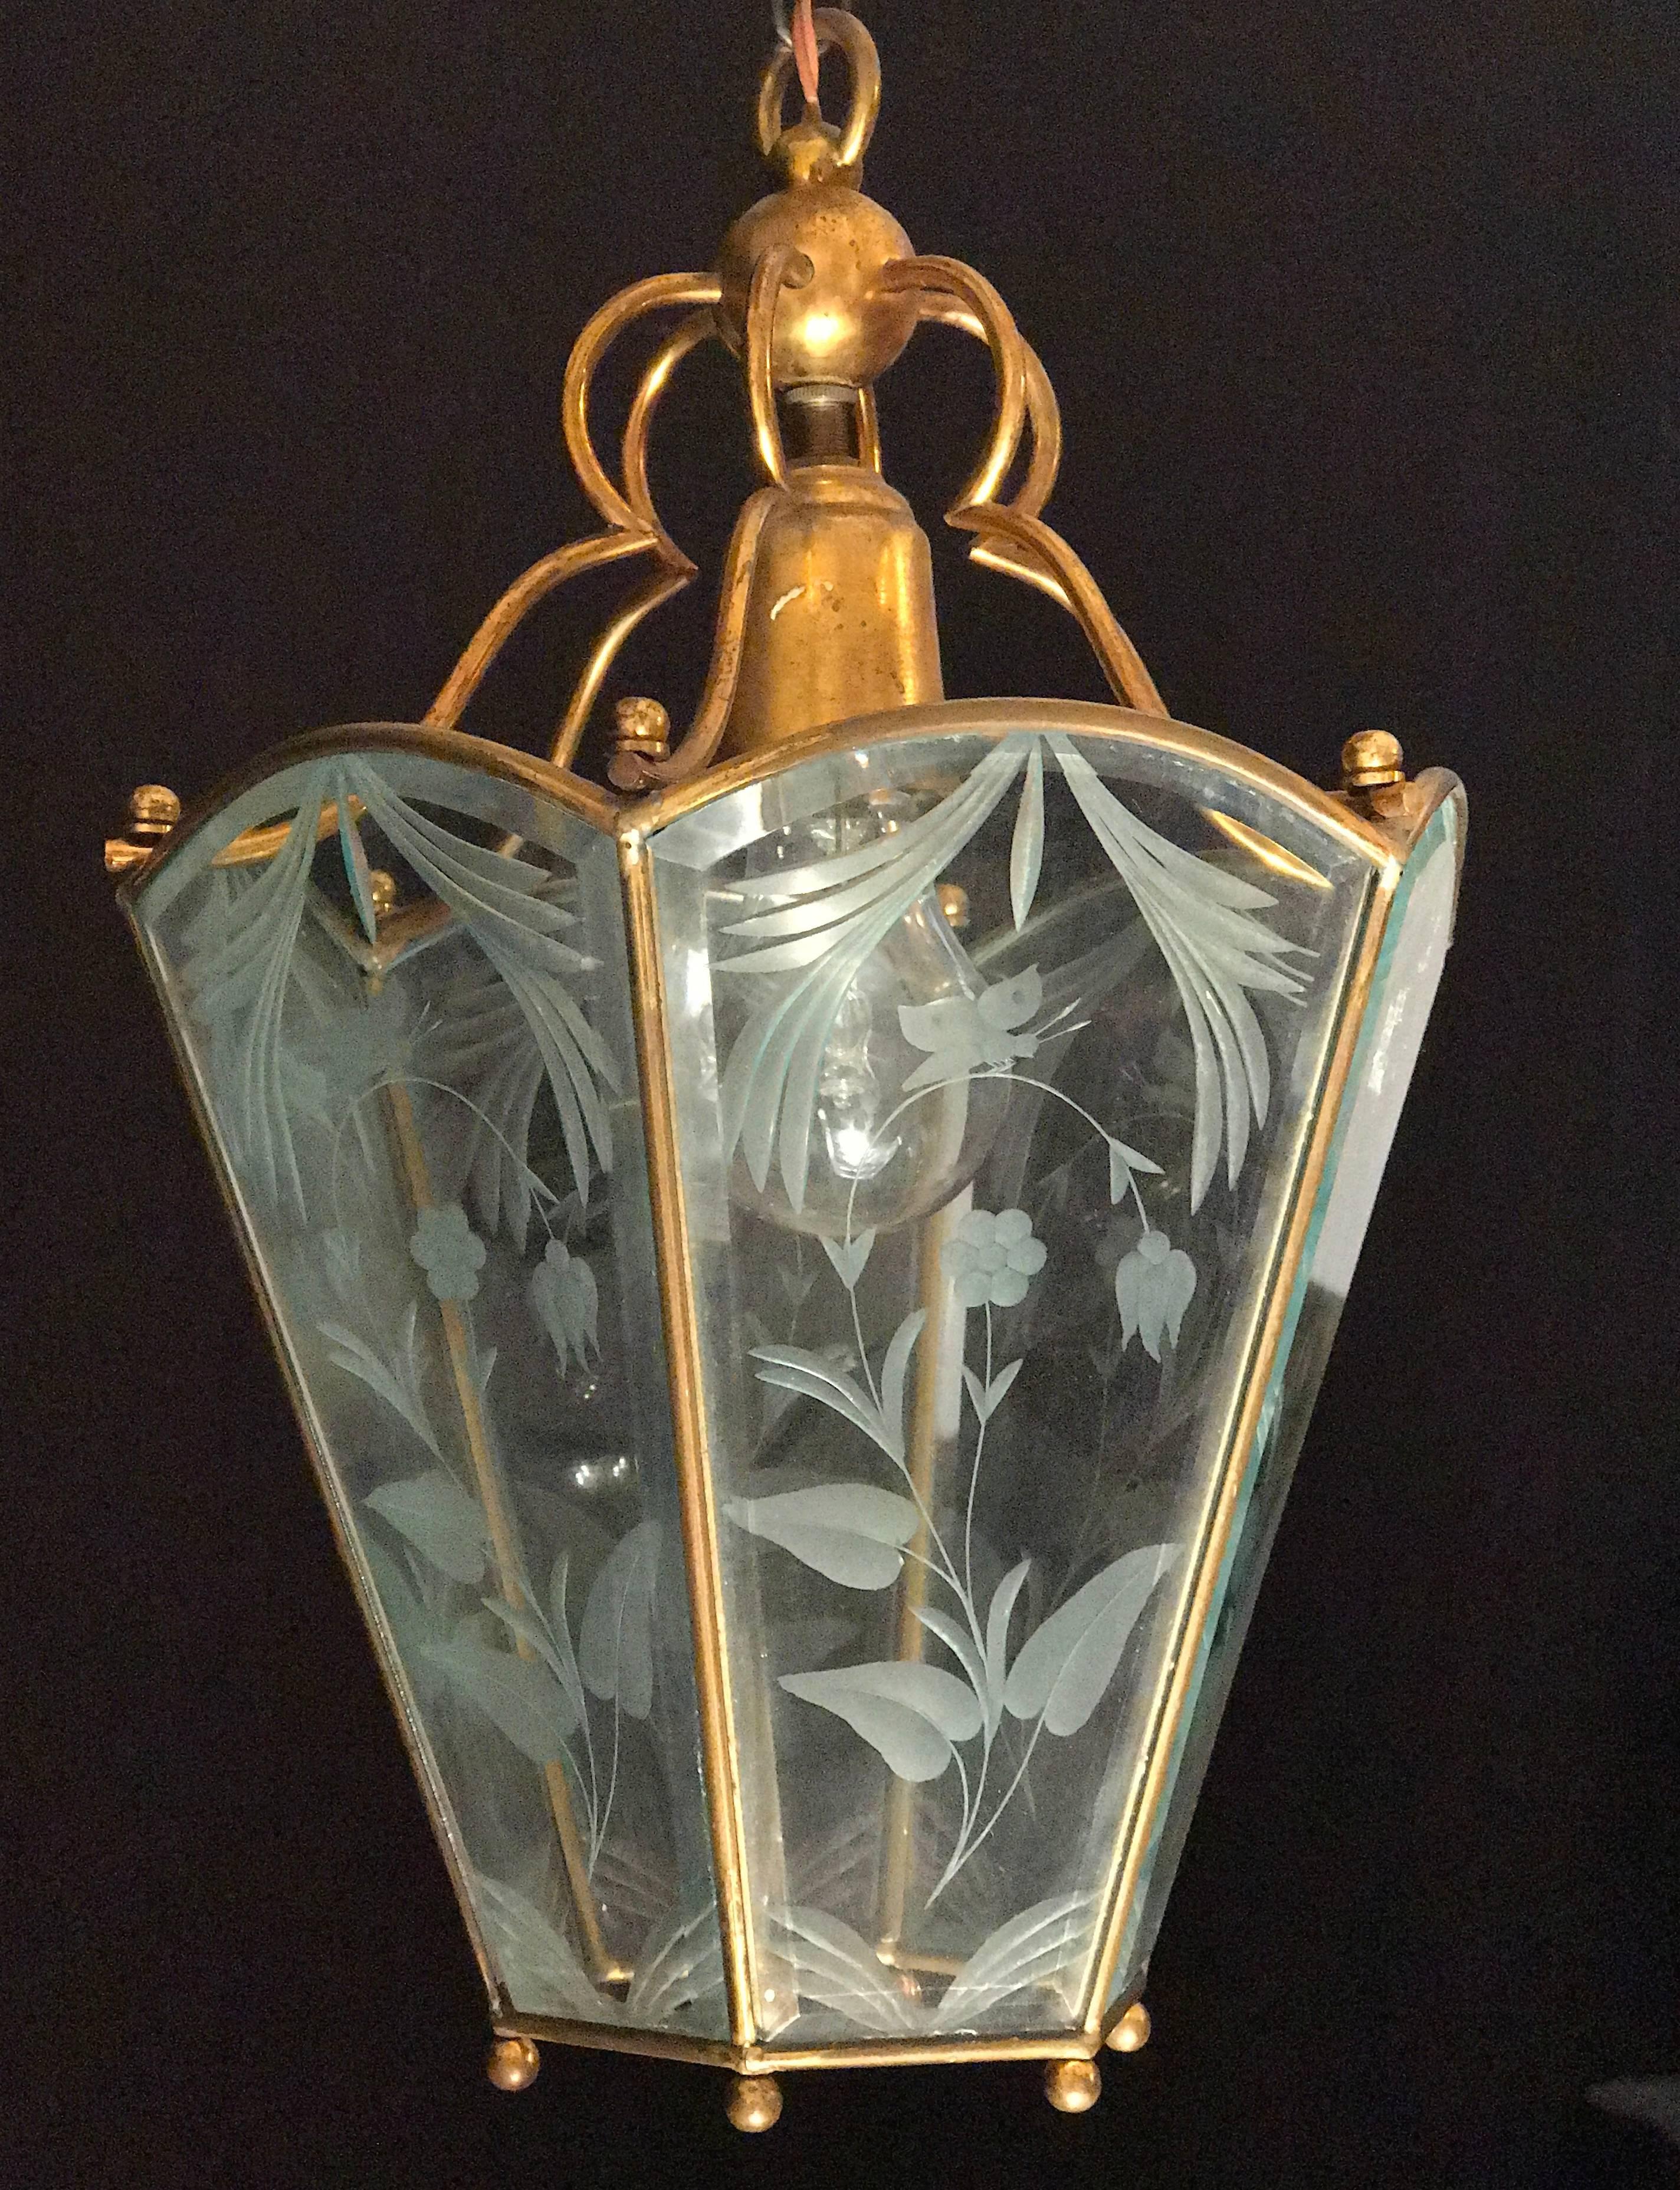 Brass-mounted with elegant engraving on glass, original conditions.
Height without chain 40 cm diameter 26 cm.